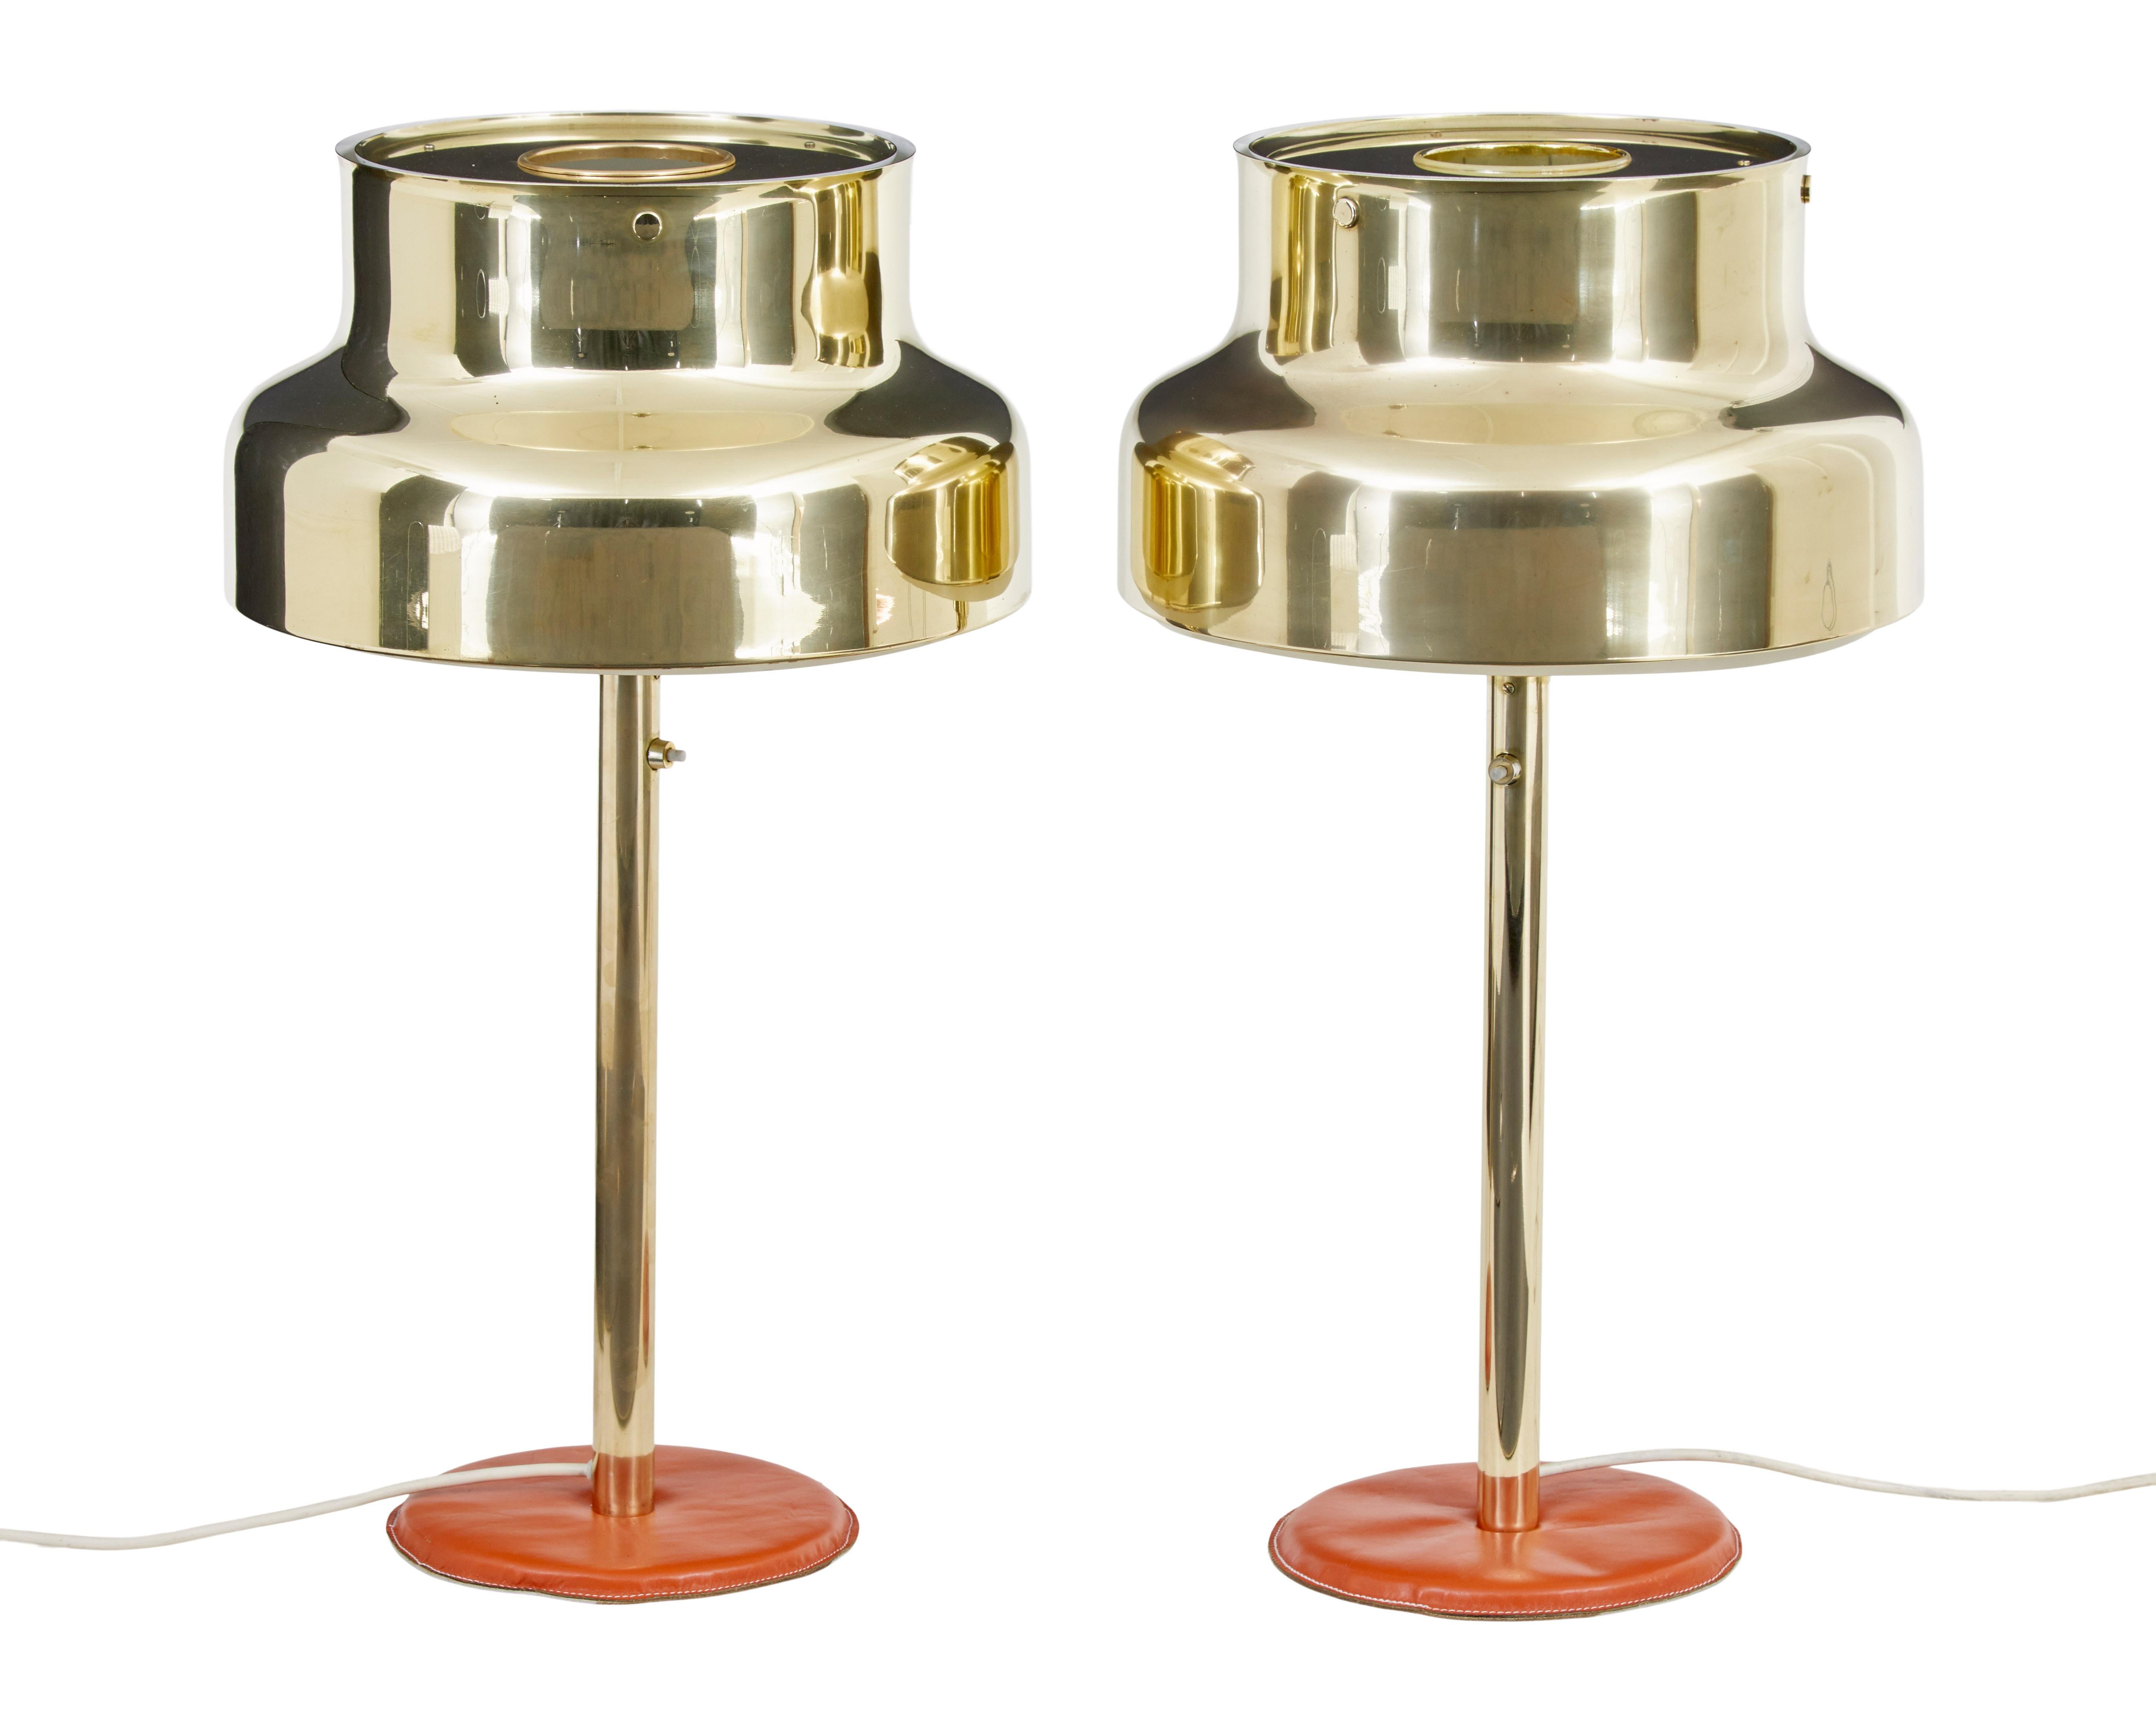 Stunning piece of design with these well known 'bumling' design lamps by Anders Pehrson for Atelje Kyktan. Shades in brass which unlike most examples online retain their original brass tops. Brass column with leather base.

Complete with underside